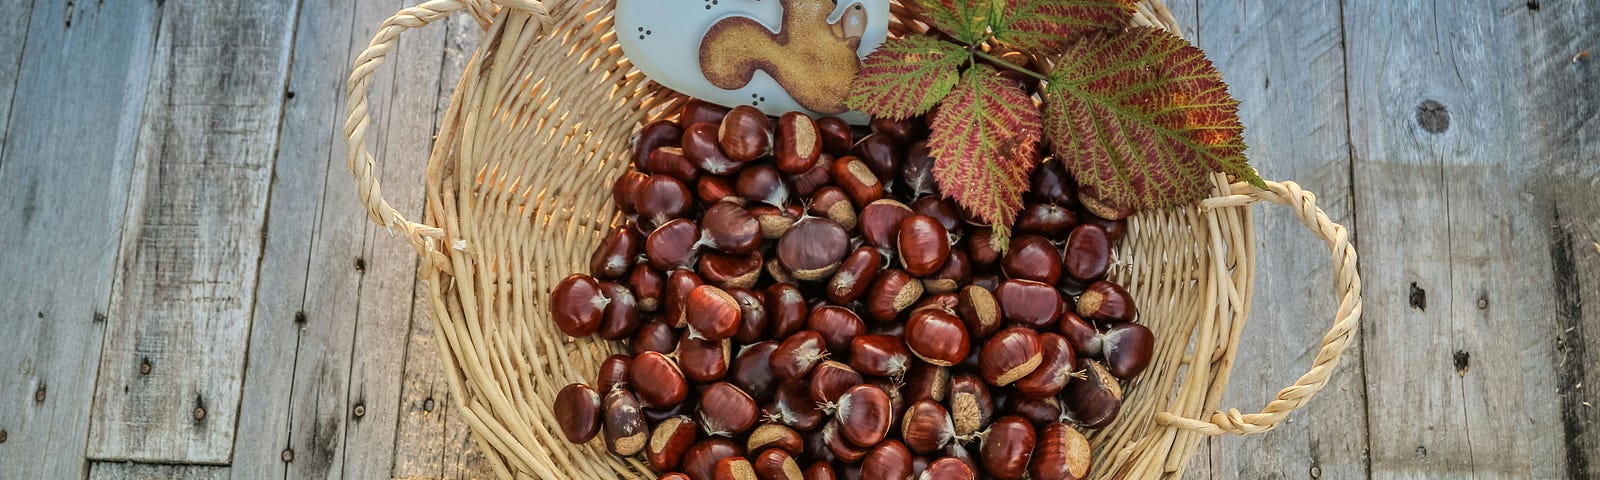 A basket of chestnuts with leaves and a ceramic heart